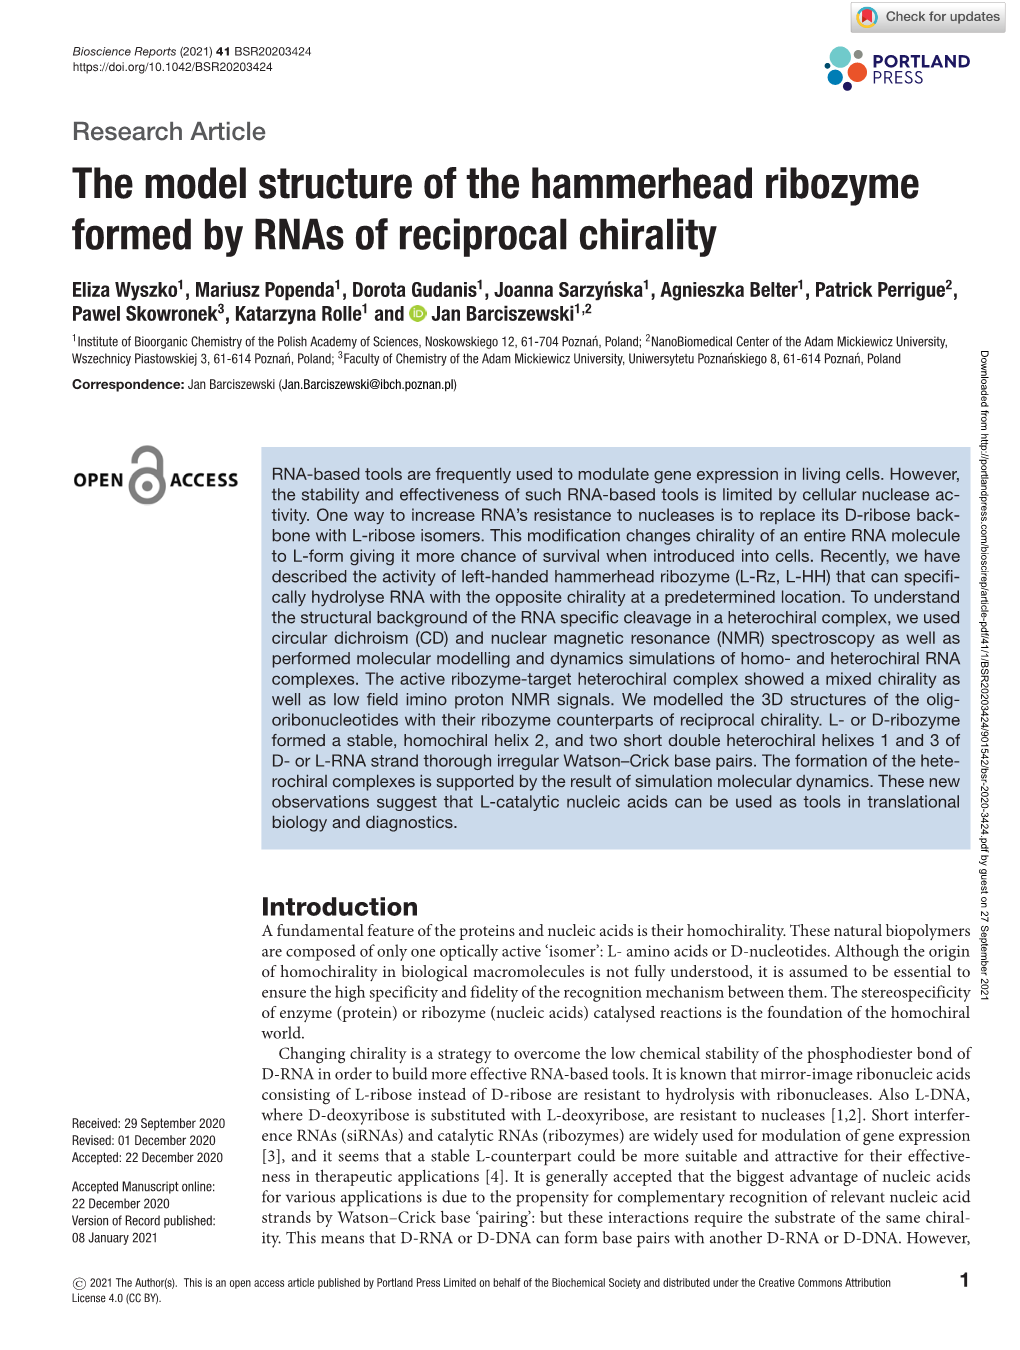 The Model Structure of the Hammerhead Ribozyme Formed by Rnas of Reciprocal Chirality